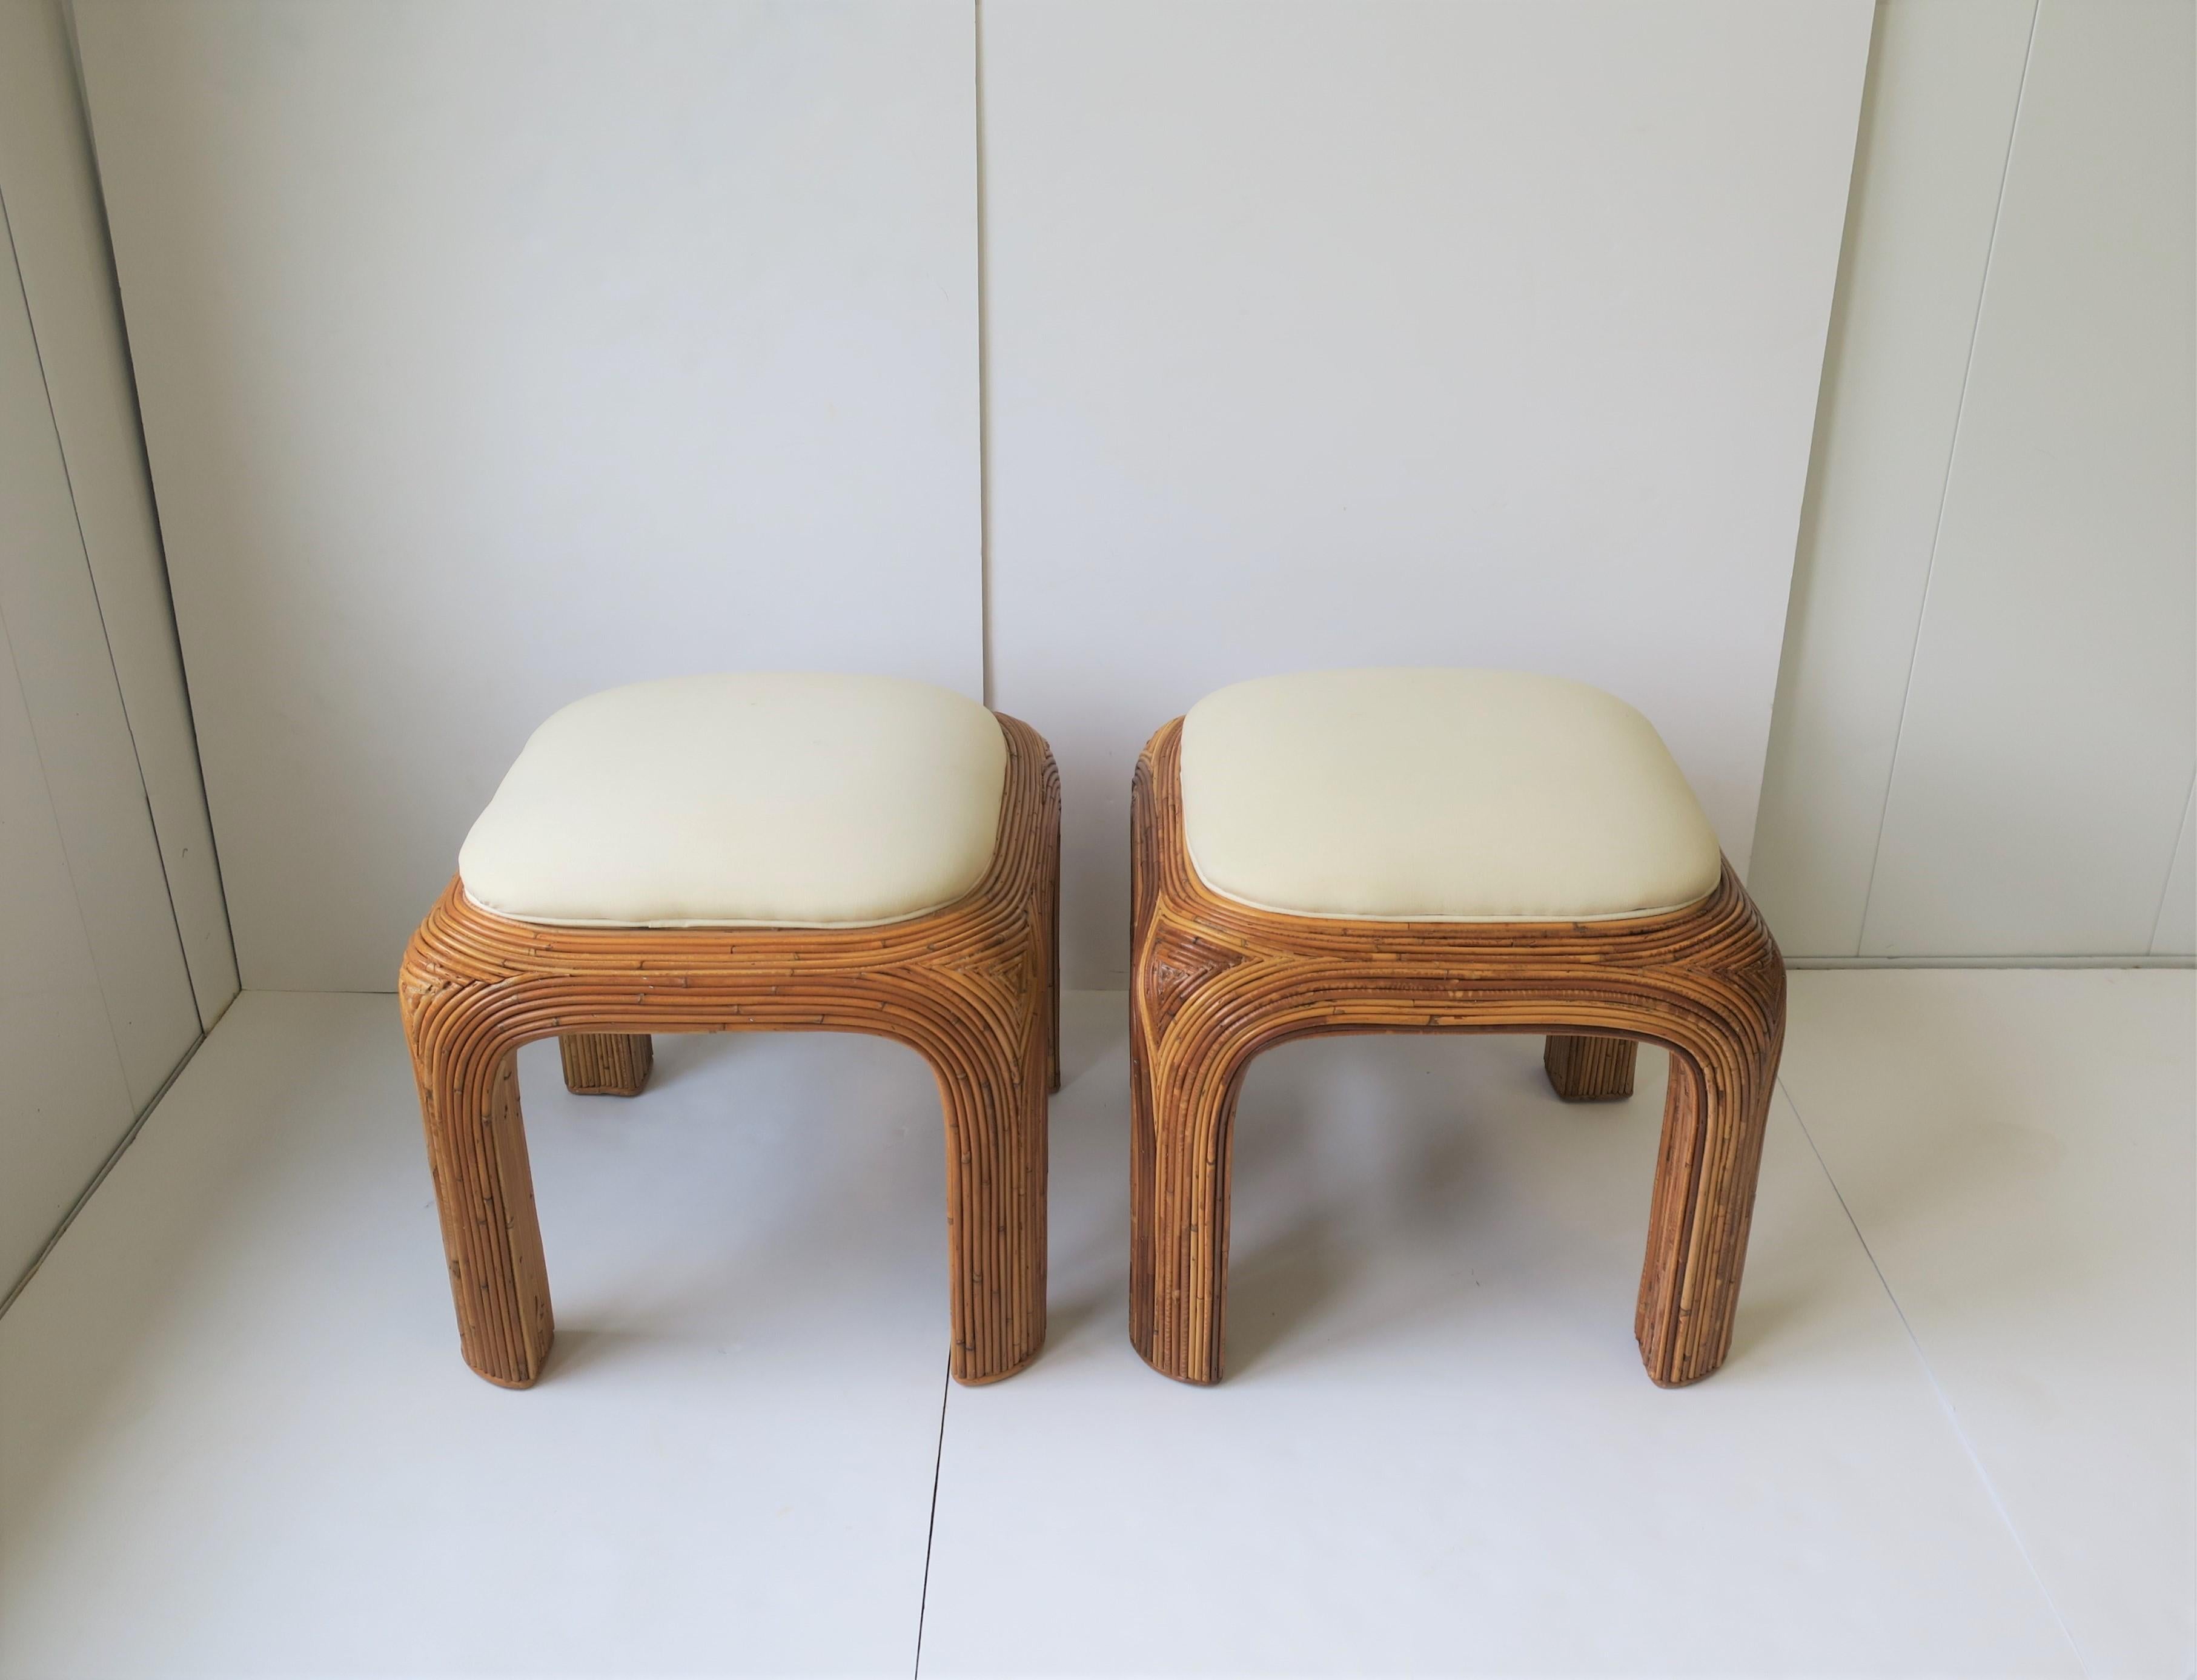 Post-Modern Pair of Wicker Pencil Reed Upholstered Stools or Benches after Gabriella Crespi